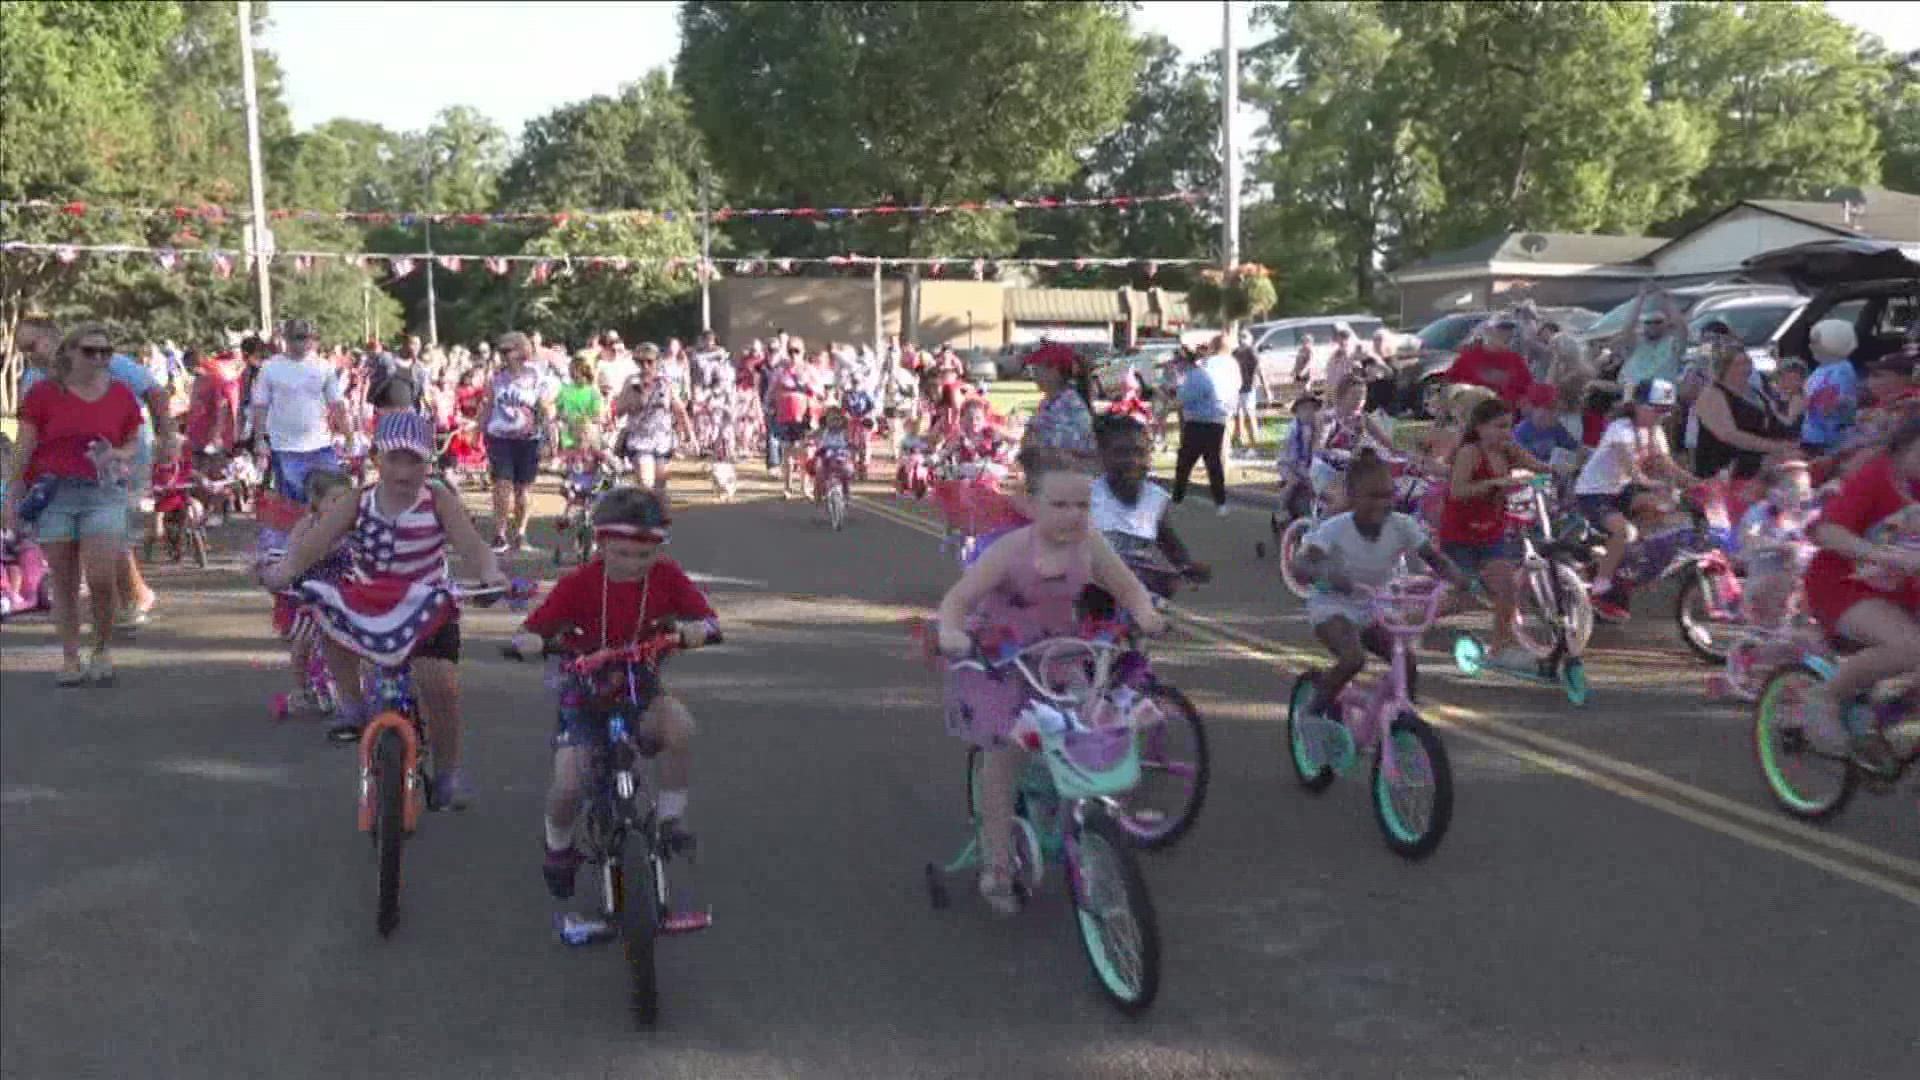 Folks of all ages gathered for the Red, White and Bikes Parade – no motorized vehicles allowed.